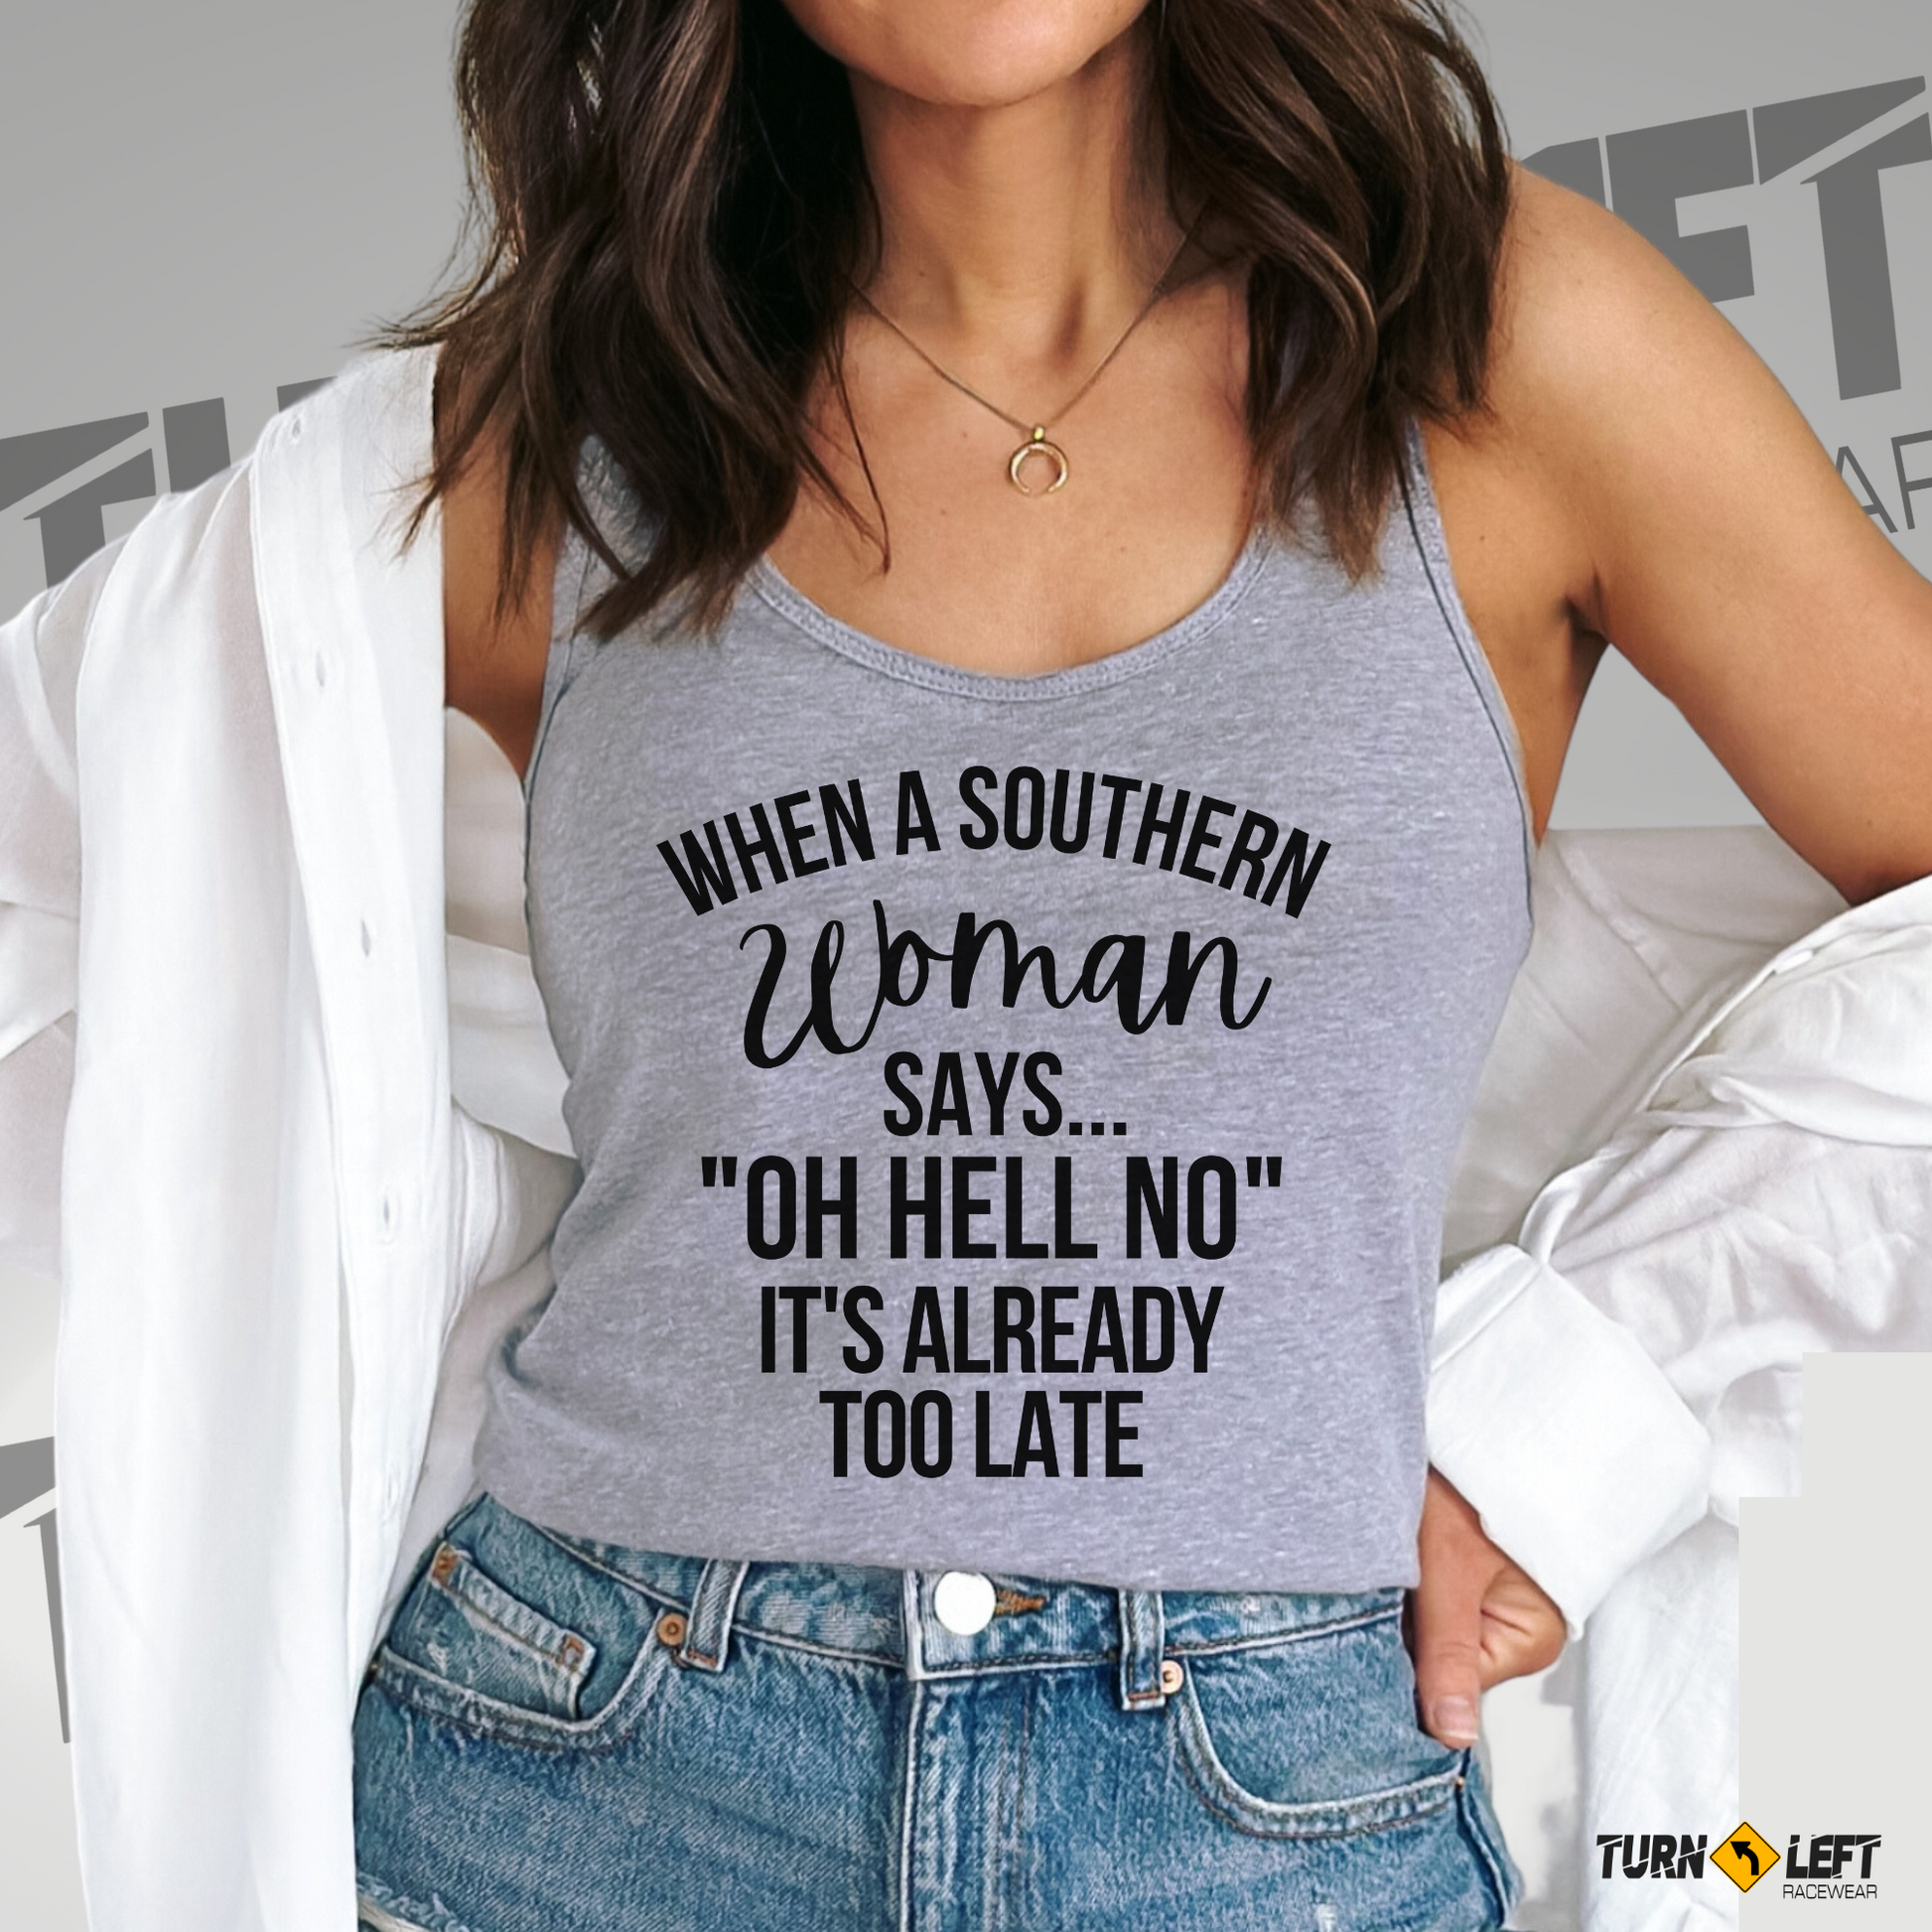 When A Southern Woman Says OH HELL No It's Already Too Late Shirts. 